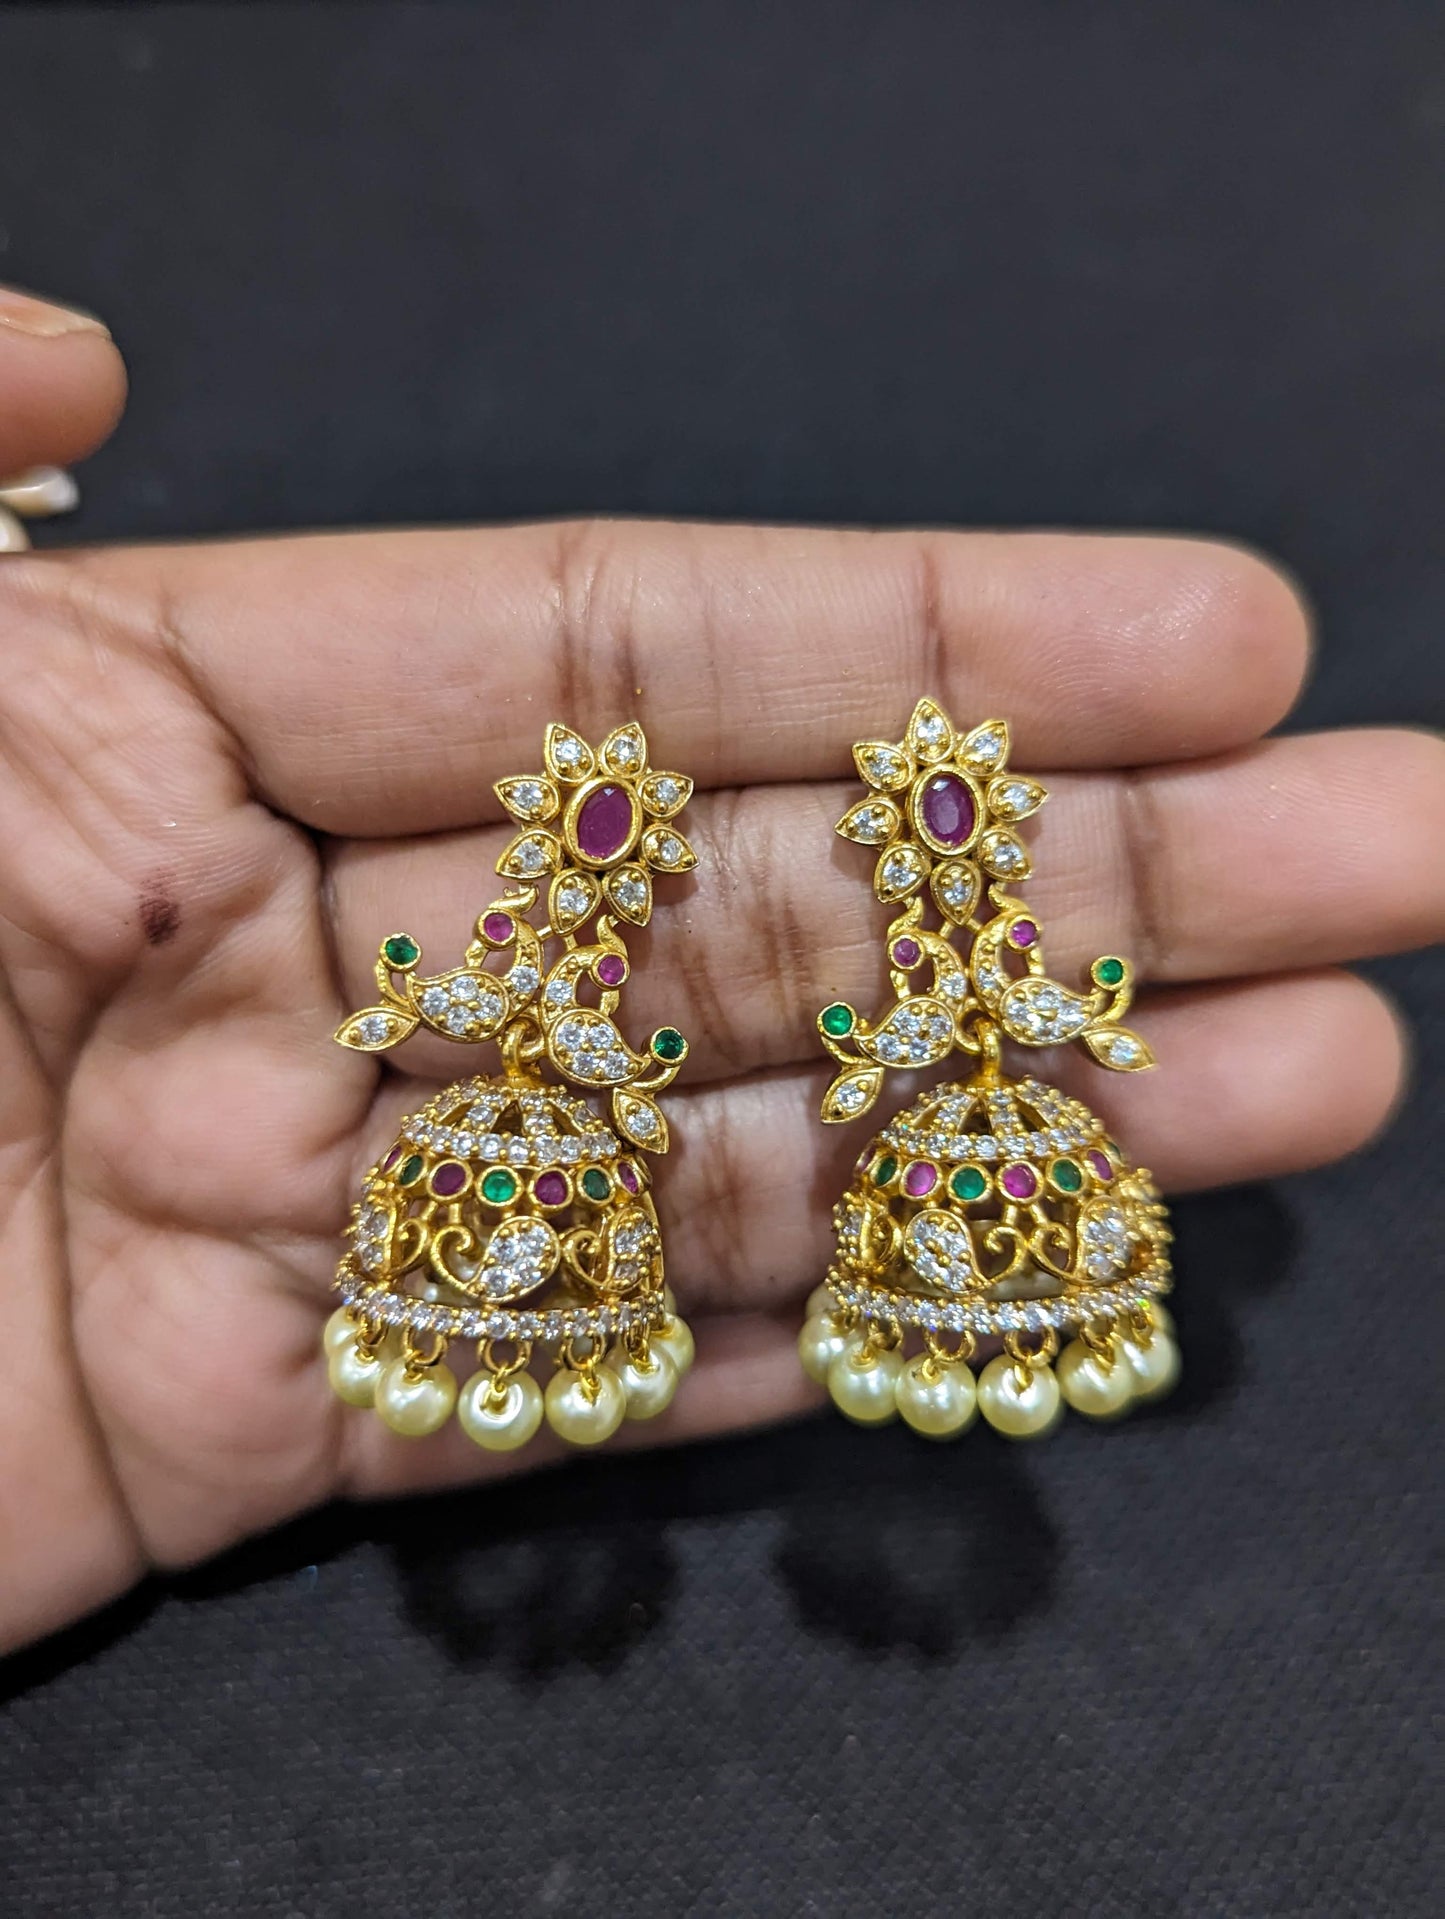 Classic Peacock design Long Chain Necklace and Jhumka Earrings set